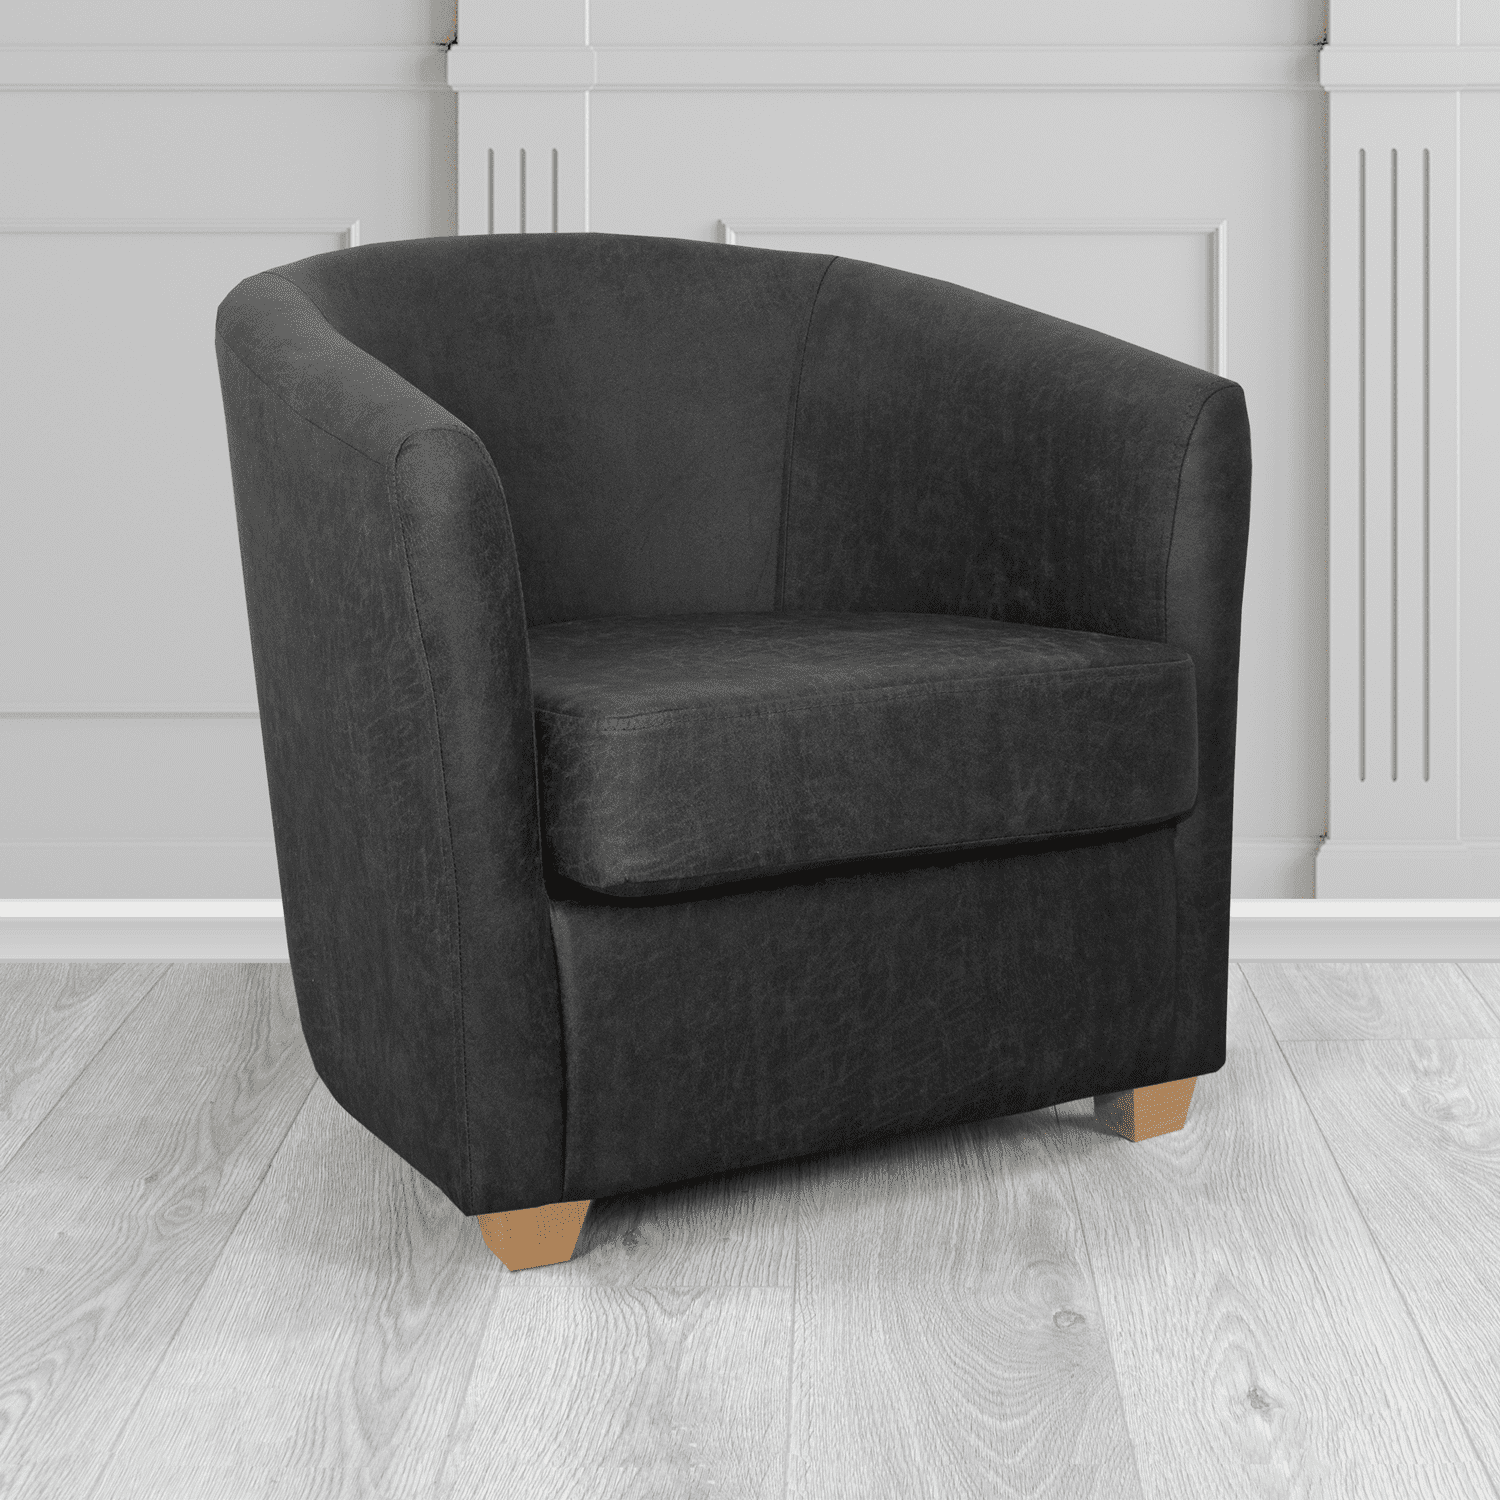 Cannes Tub Chair in Nevada Black Faux Leather - The Tub Chair Shop